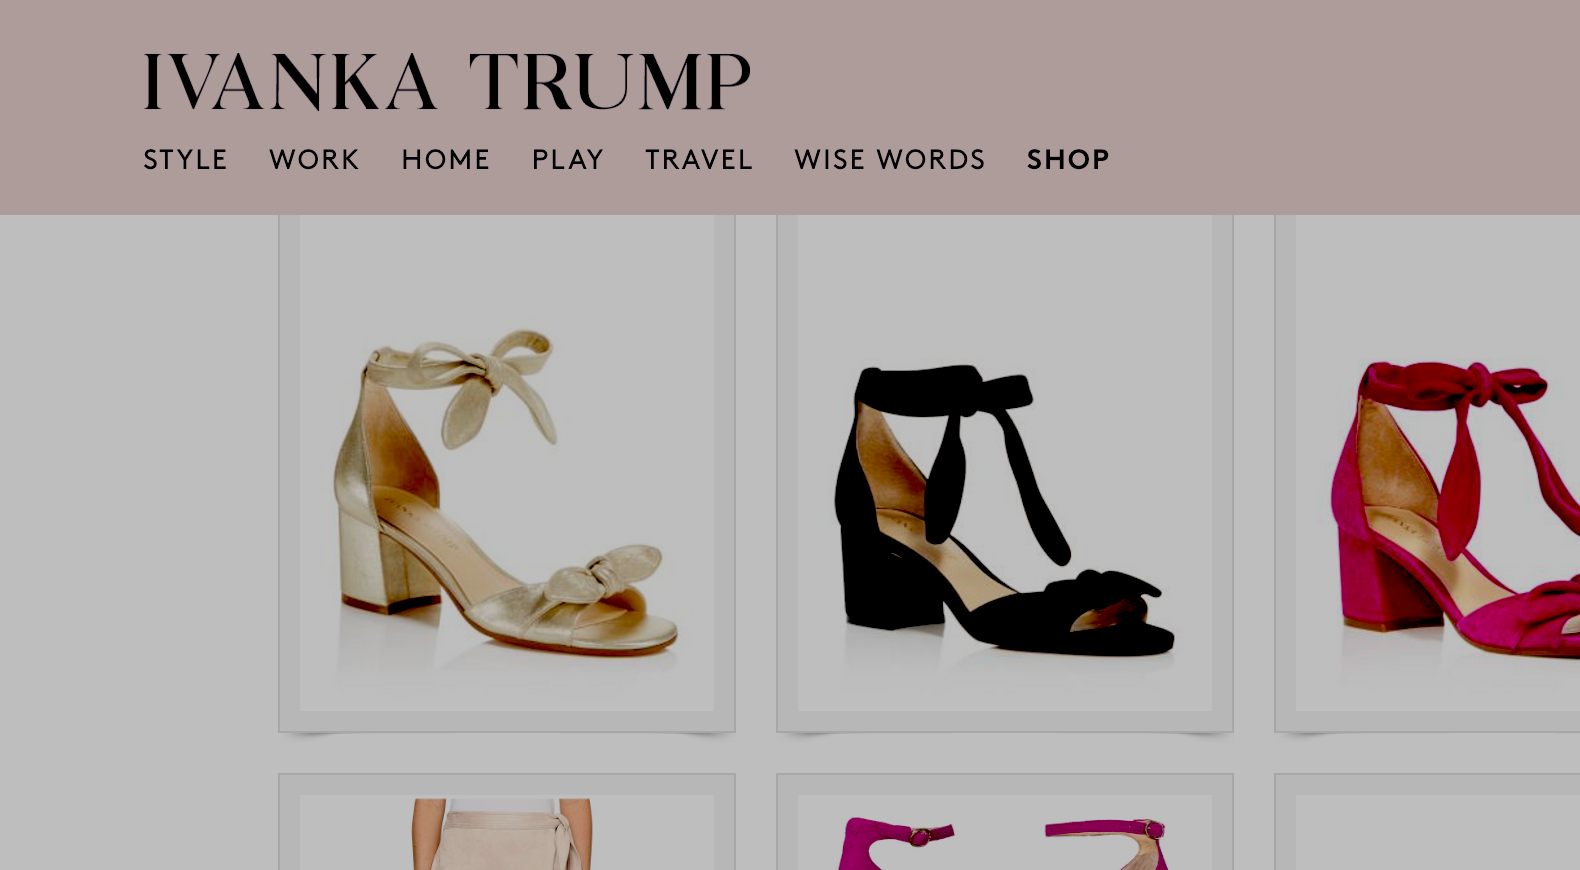 White House Staffer Kellyanne Conway Encourages People To “Go Buy Ivanka’s Stuff”